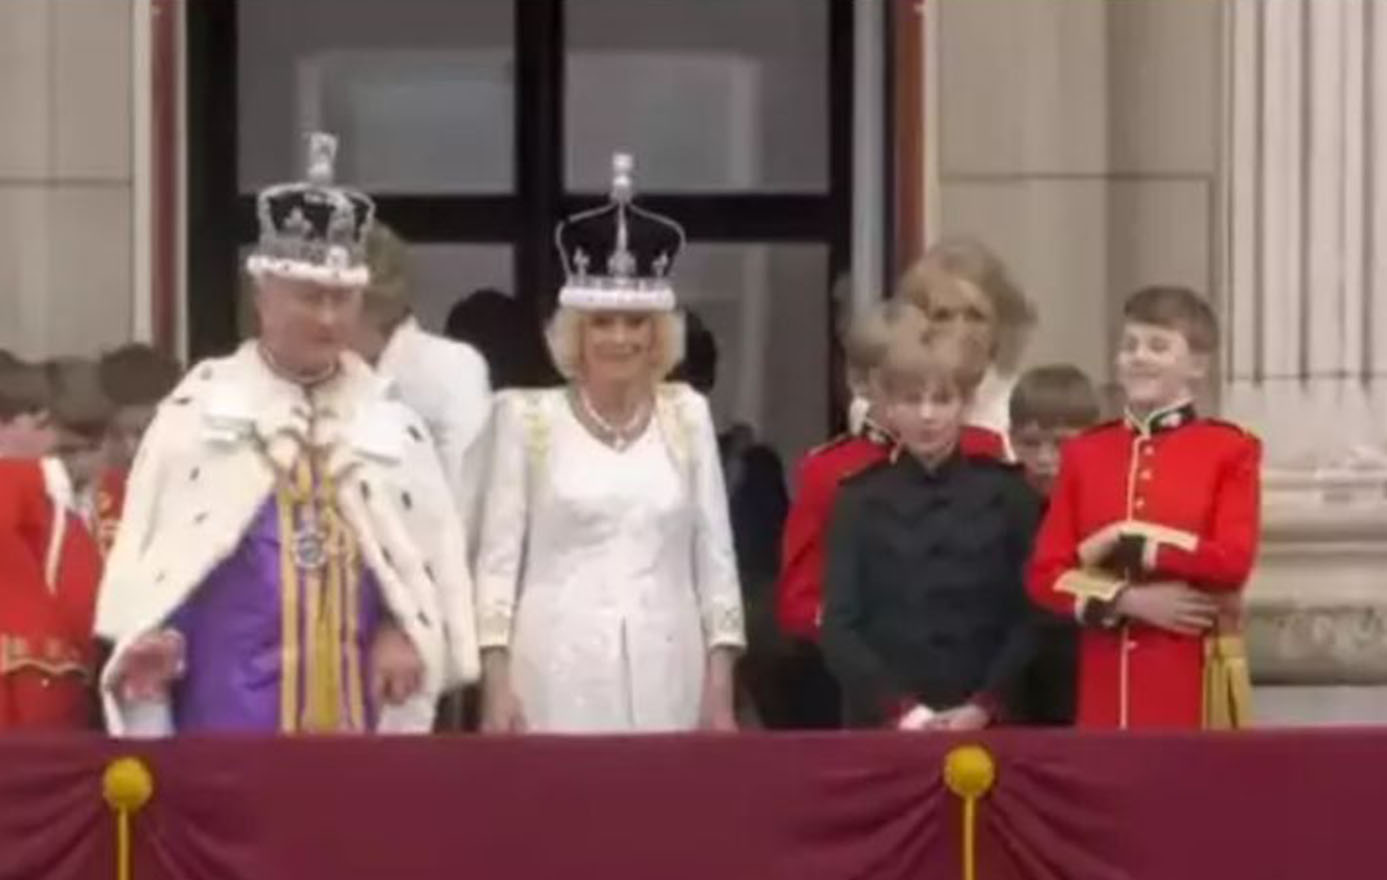 Celebrating the Coronation of Their Majesties King Charles III and Queen Camilla